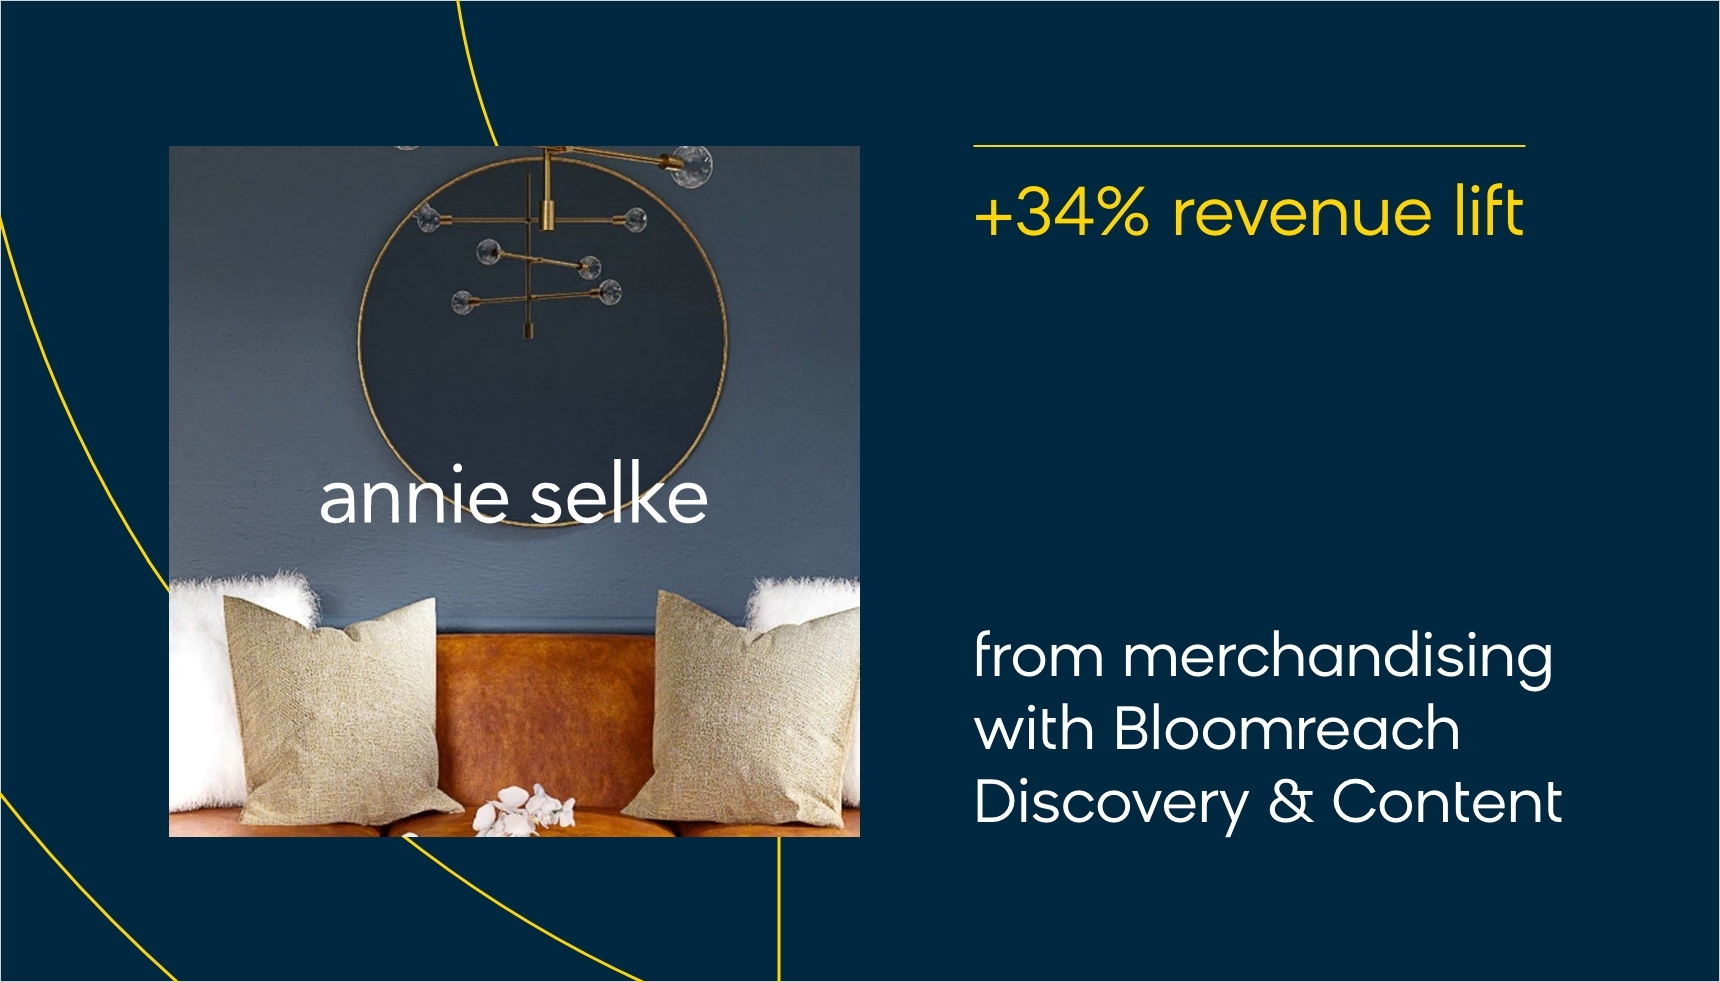 Home interiors retailer Annie Selke saw a 40% increase in revenue from intelligent site search.